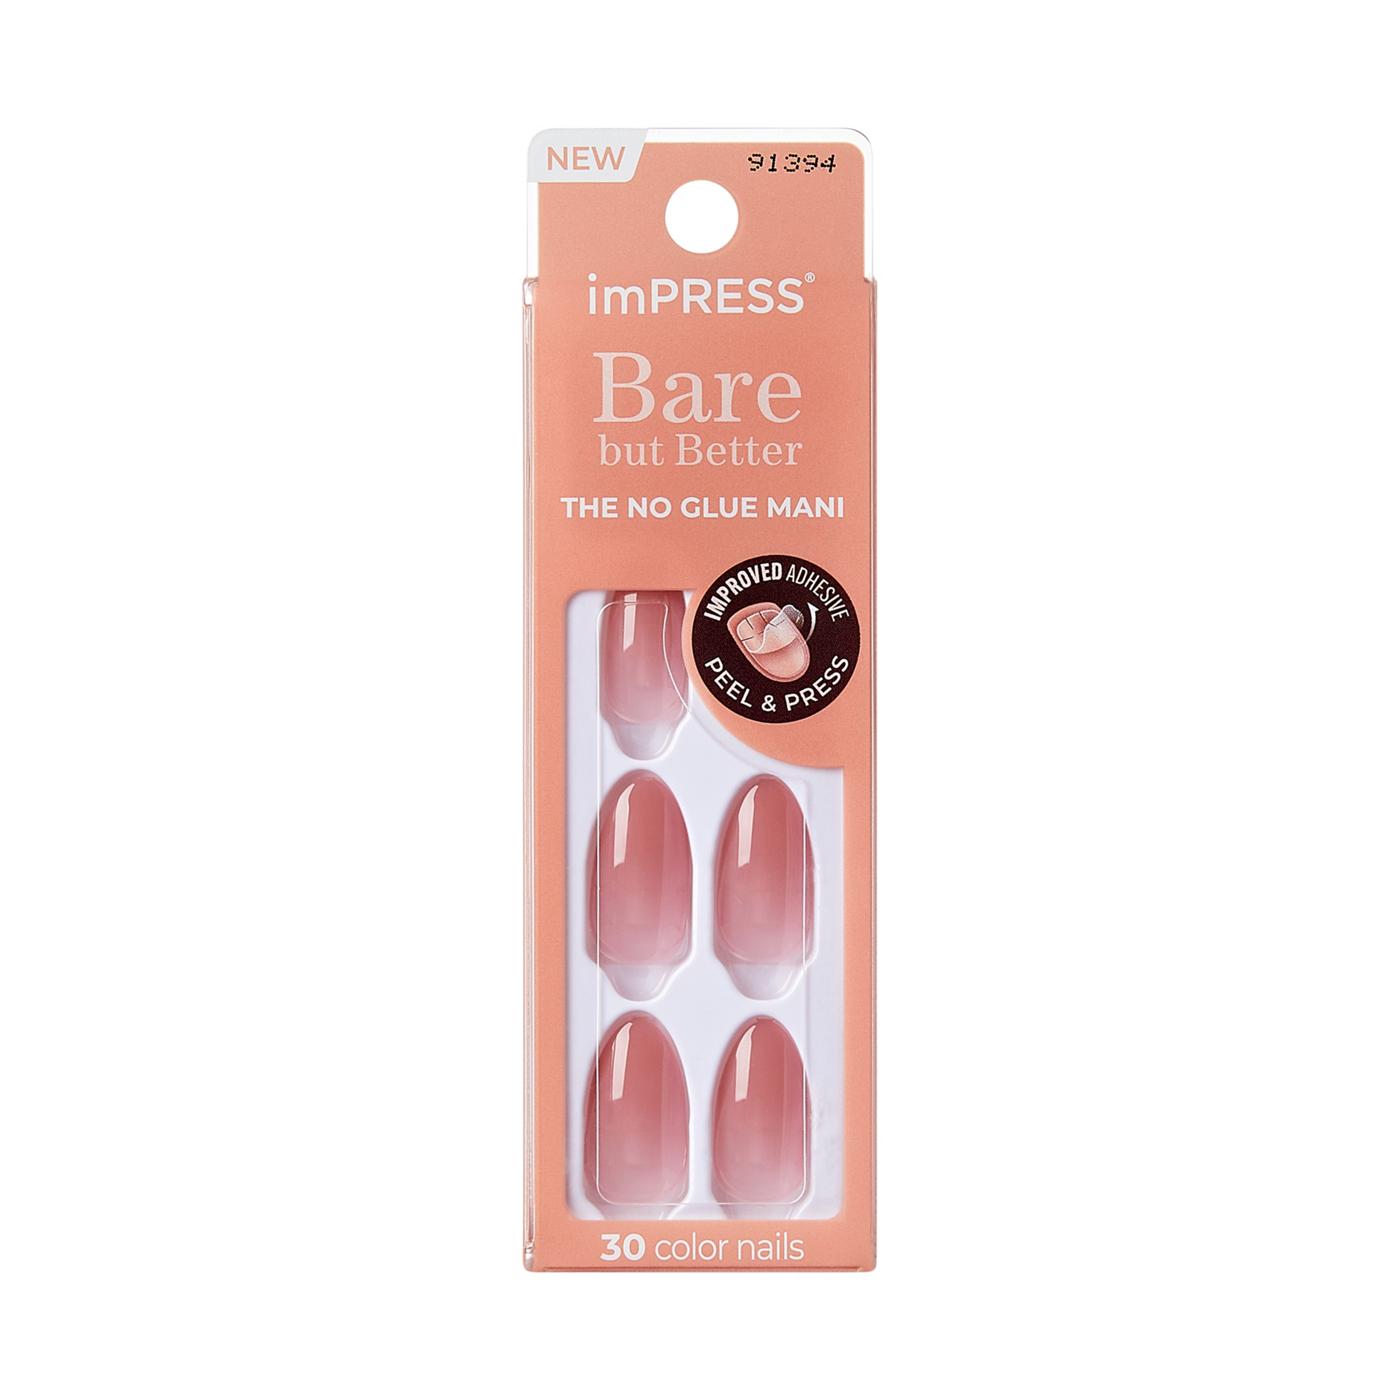 KISS imPRESS Bare But Better Manicure - Serenity; image 1 of 5